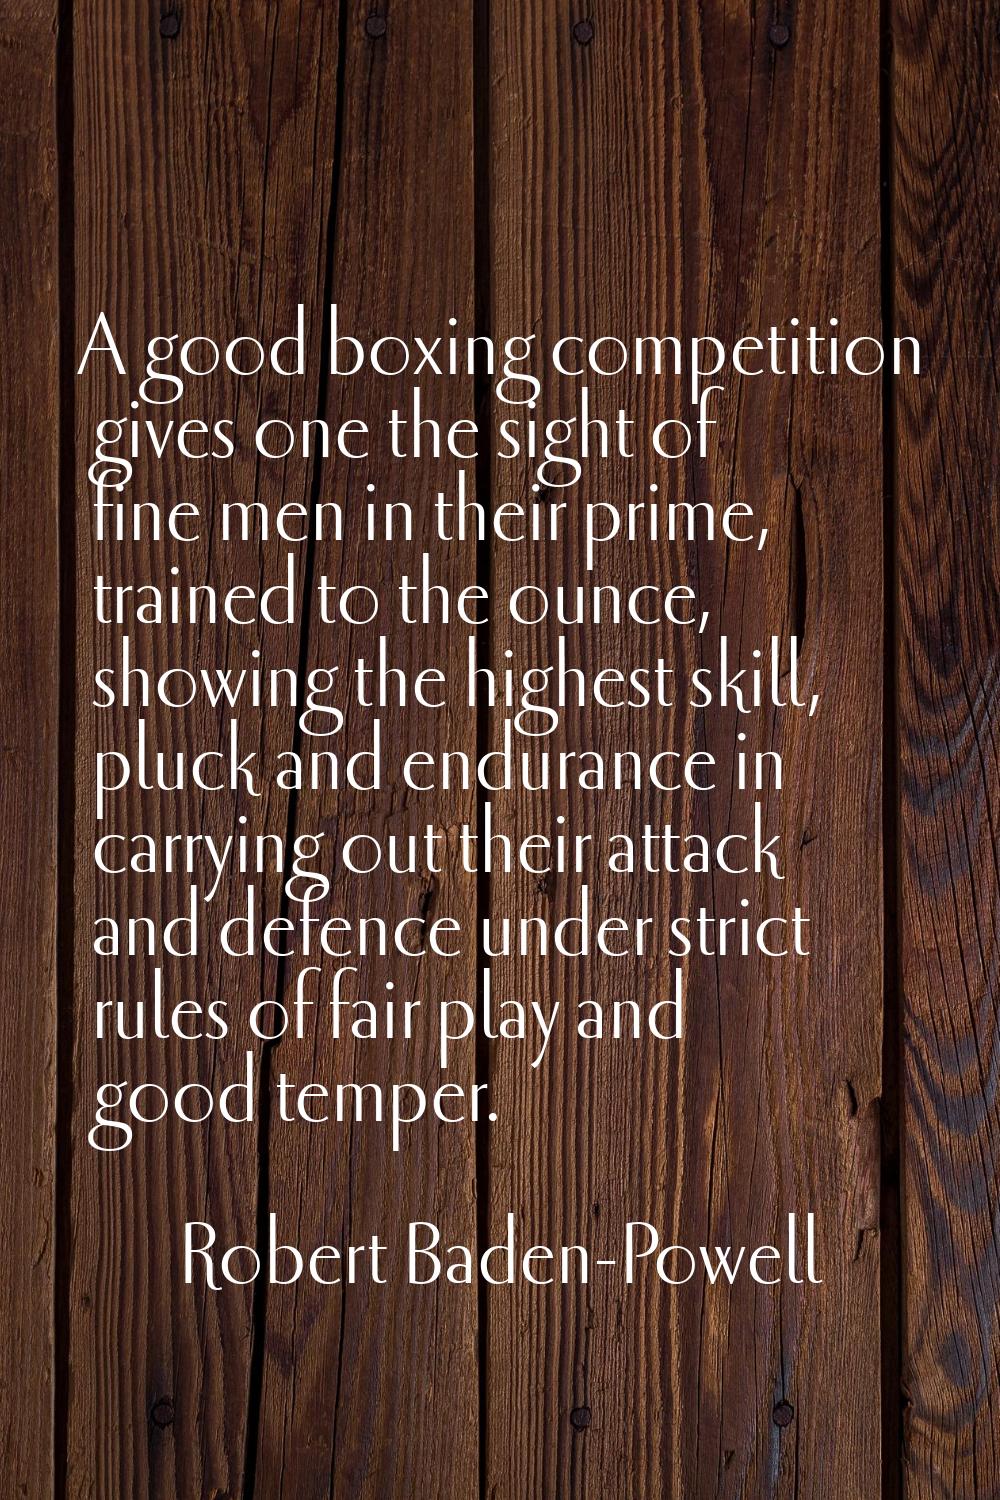 A good boxing competition gives one the sight of fine men in their prime, trained to the ounce, sho